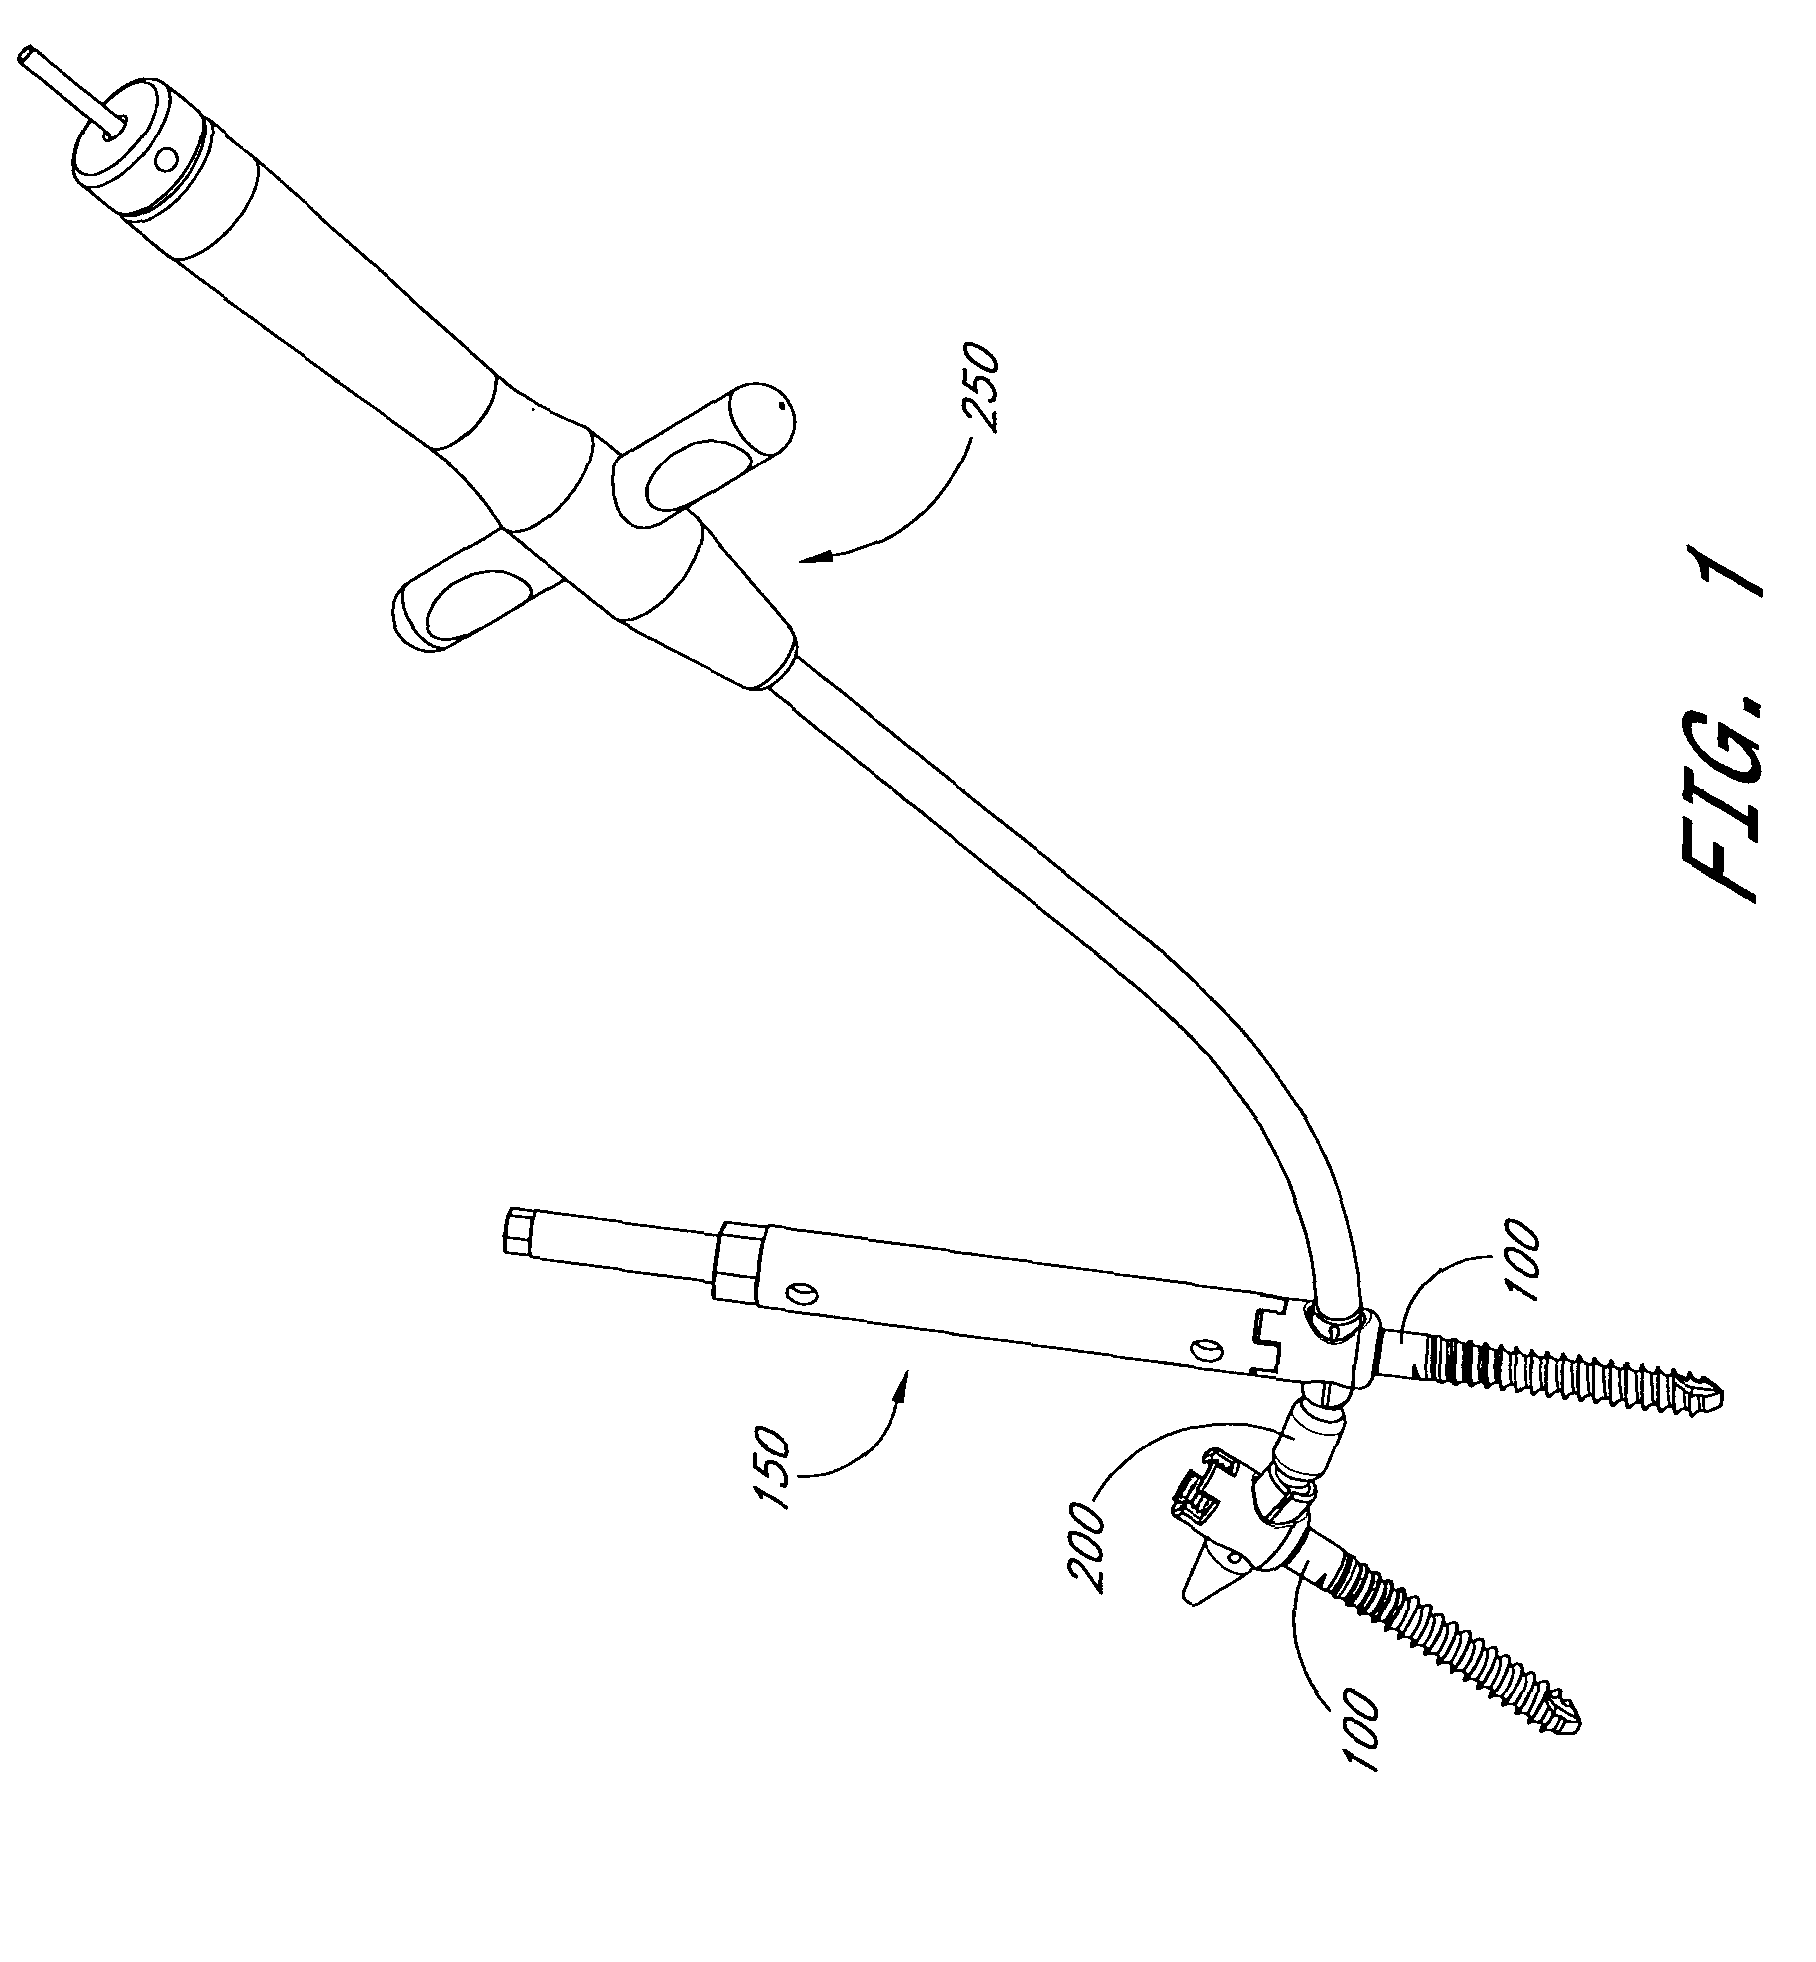 Articulating spinal fixation rod and system